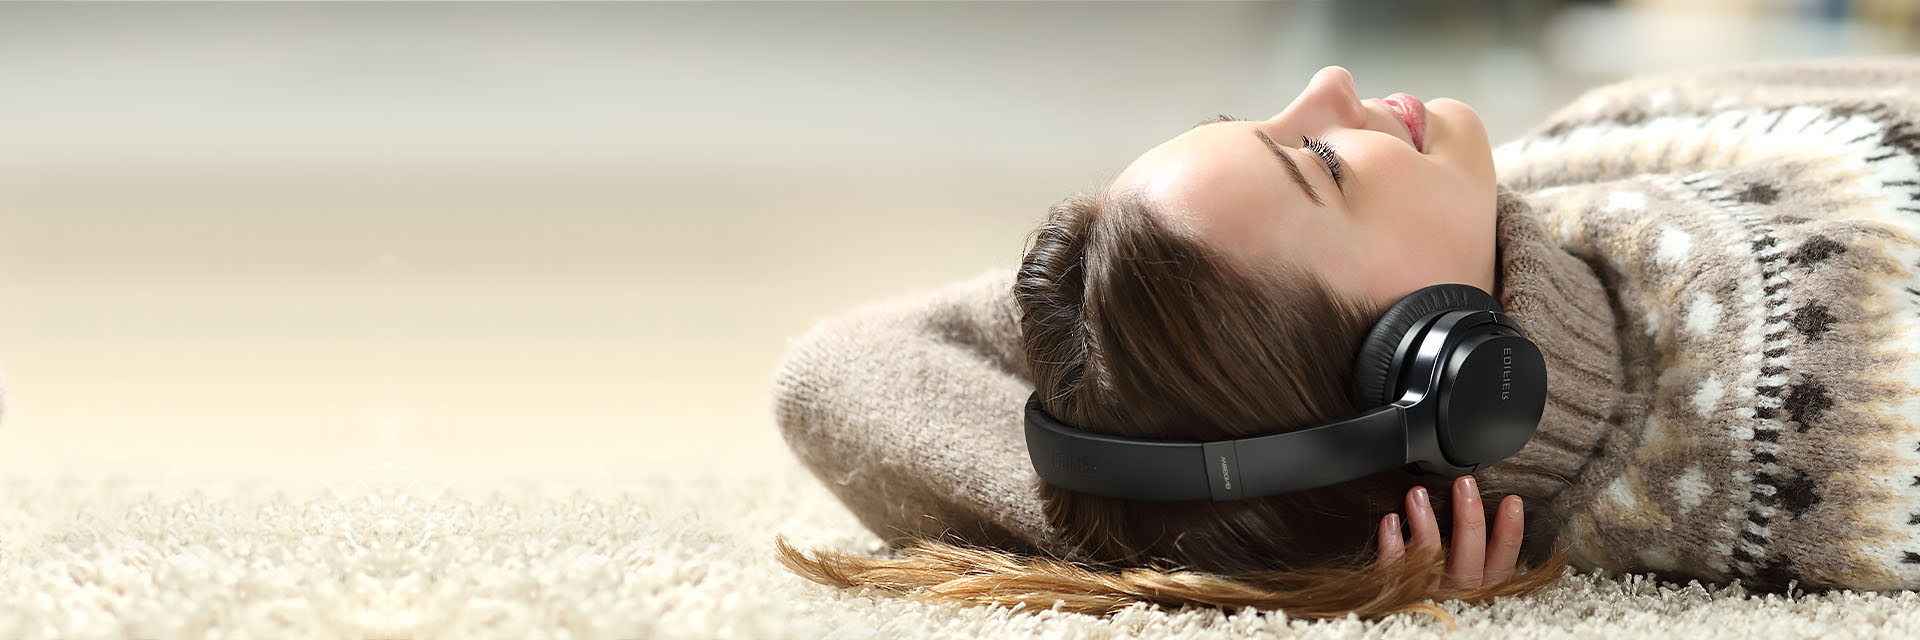 A girl is lying on the ground listening to music with Edifier W860NB noise-cancelling headphone